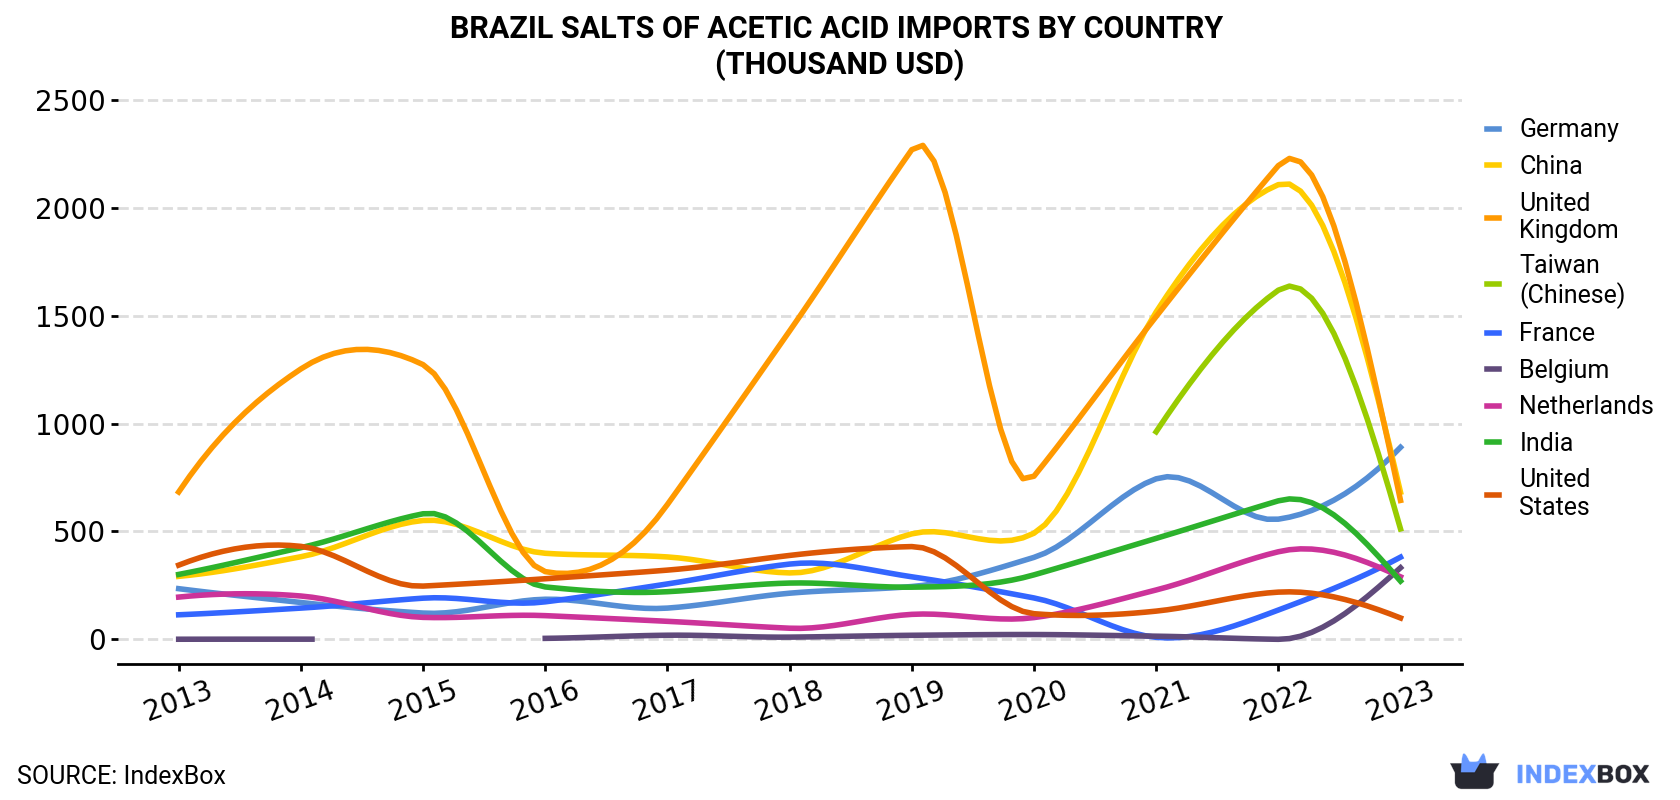 Brazil Salts Of Acetic Acid Imports By Country (Thousand USD)